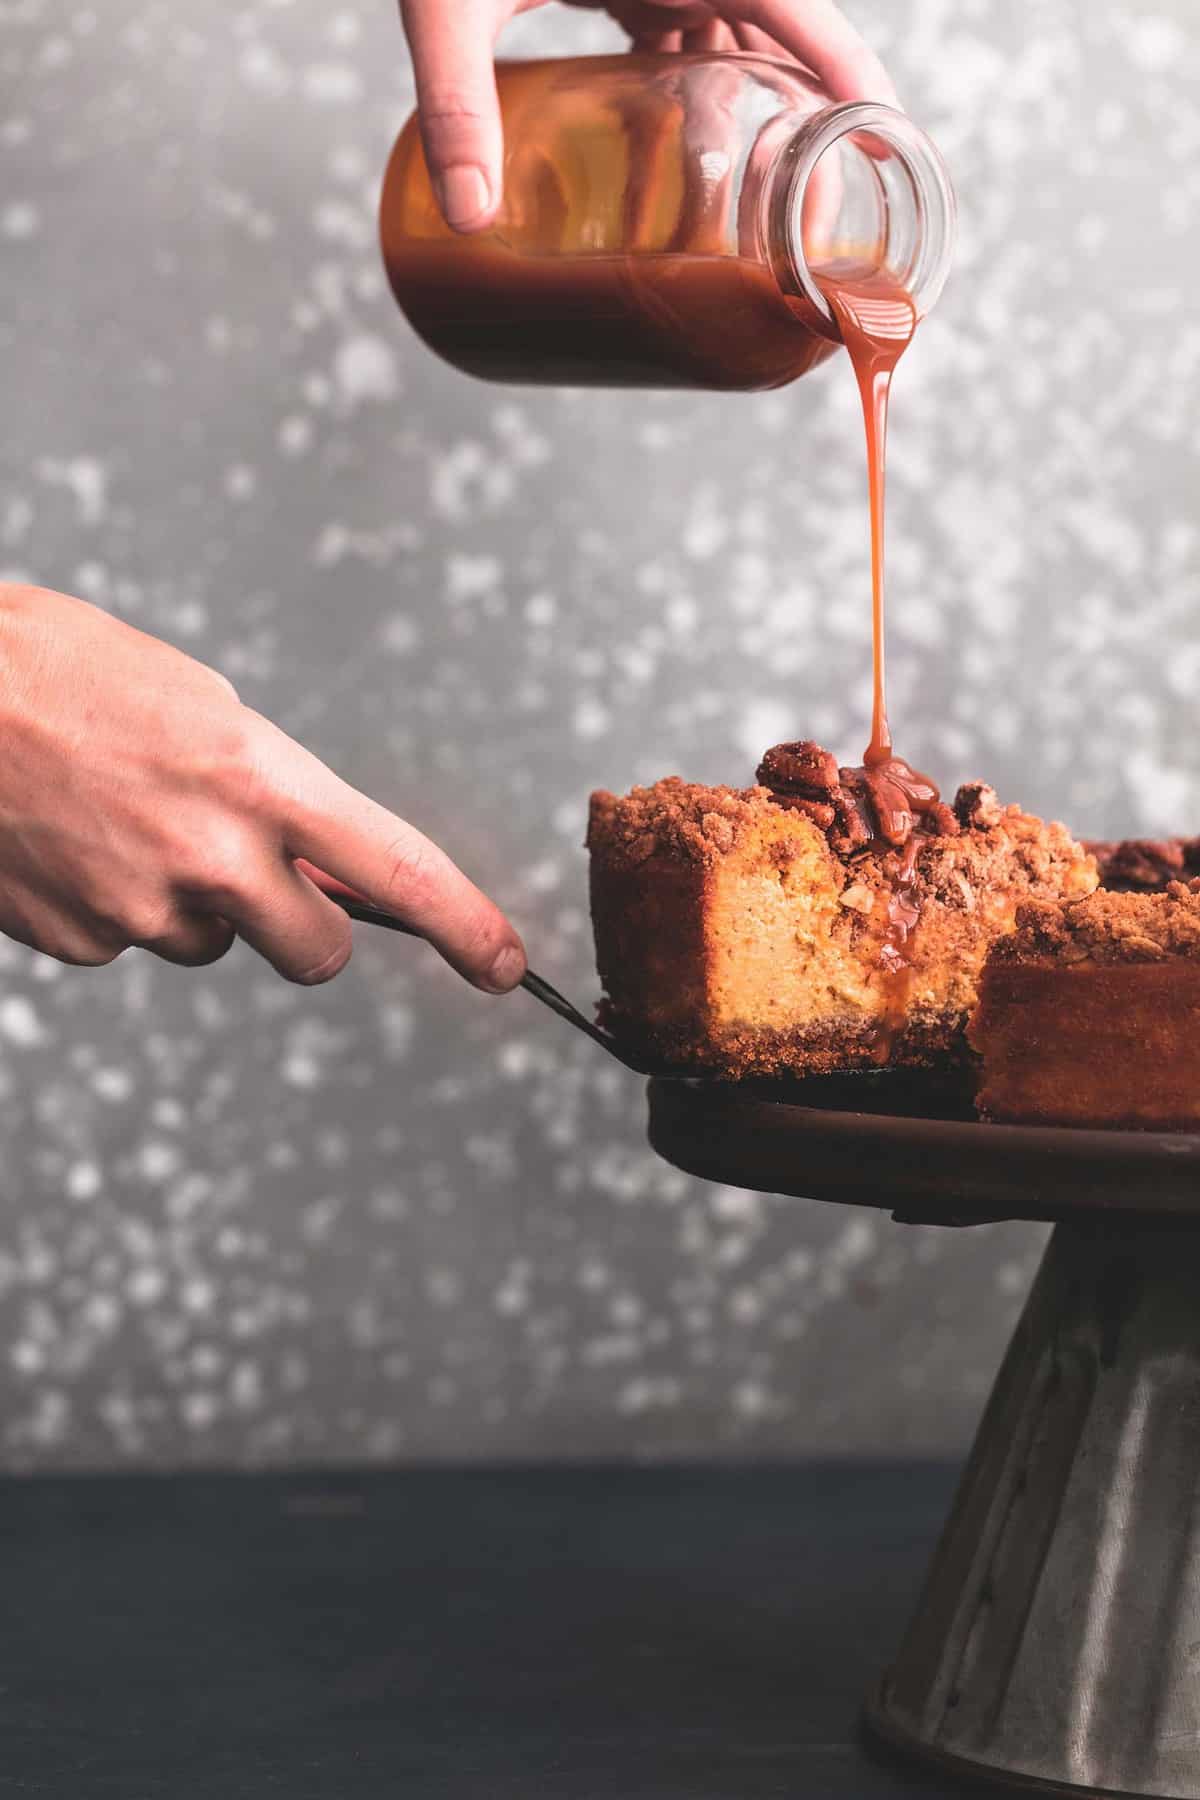 a hand separating a slice of caramel pecan pumpkin cheesecake from the rest of the cheesecake and pouring caramel sauce on the slice with the other hand.